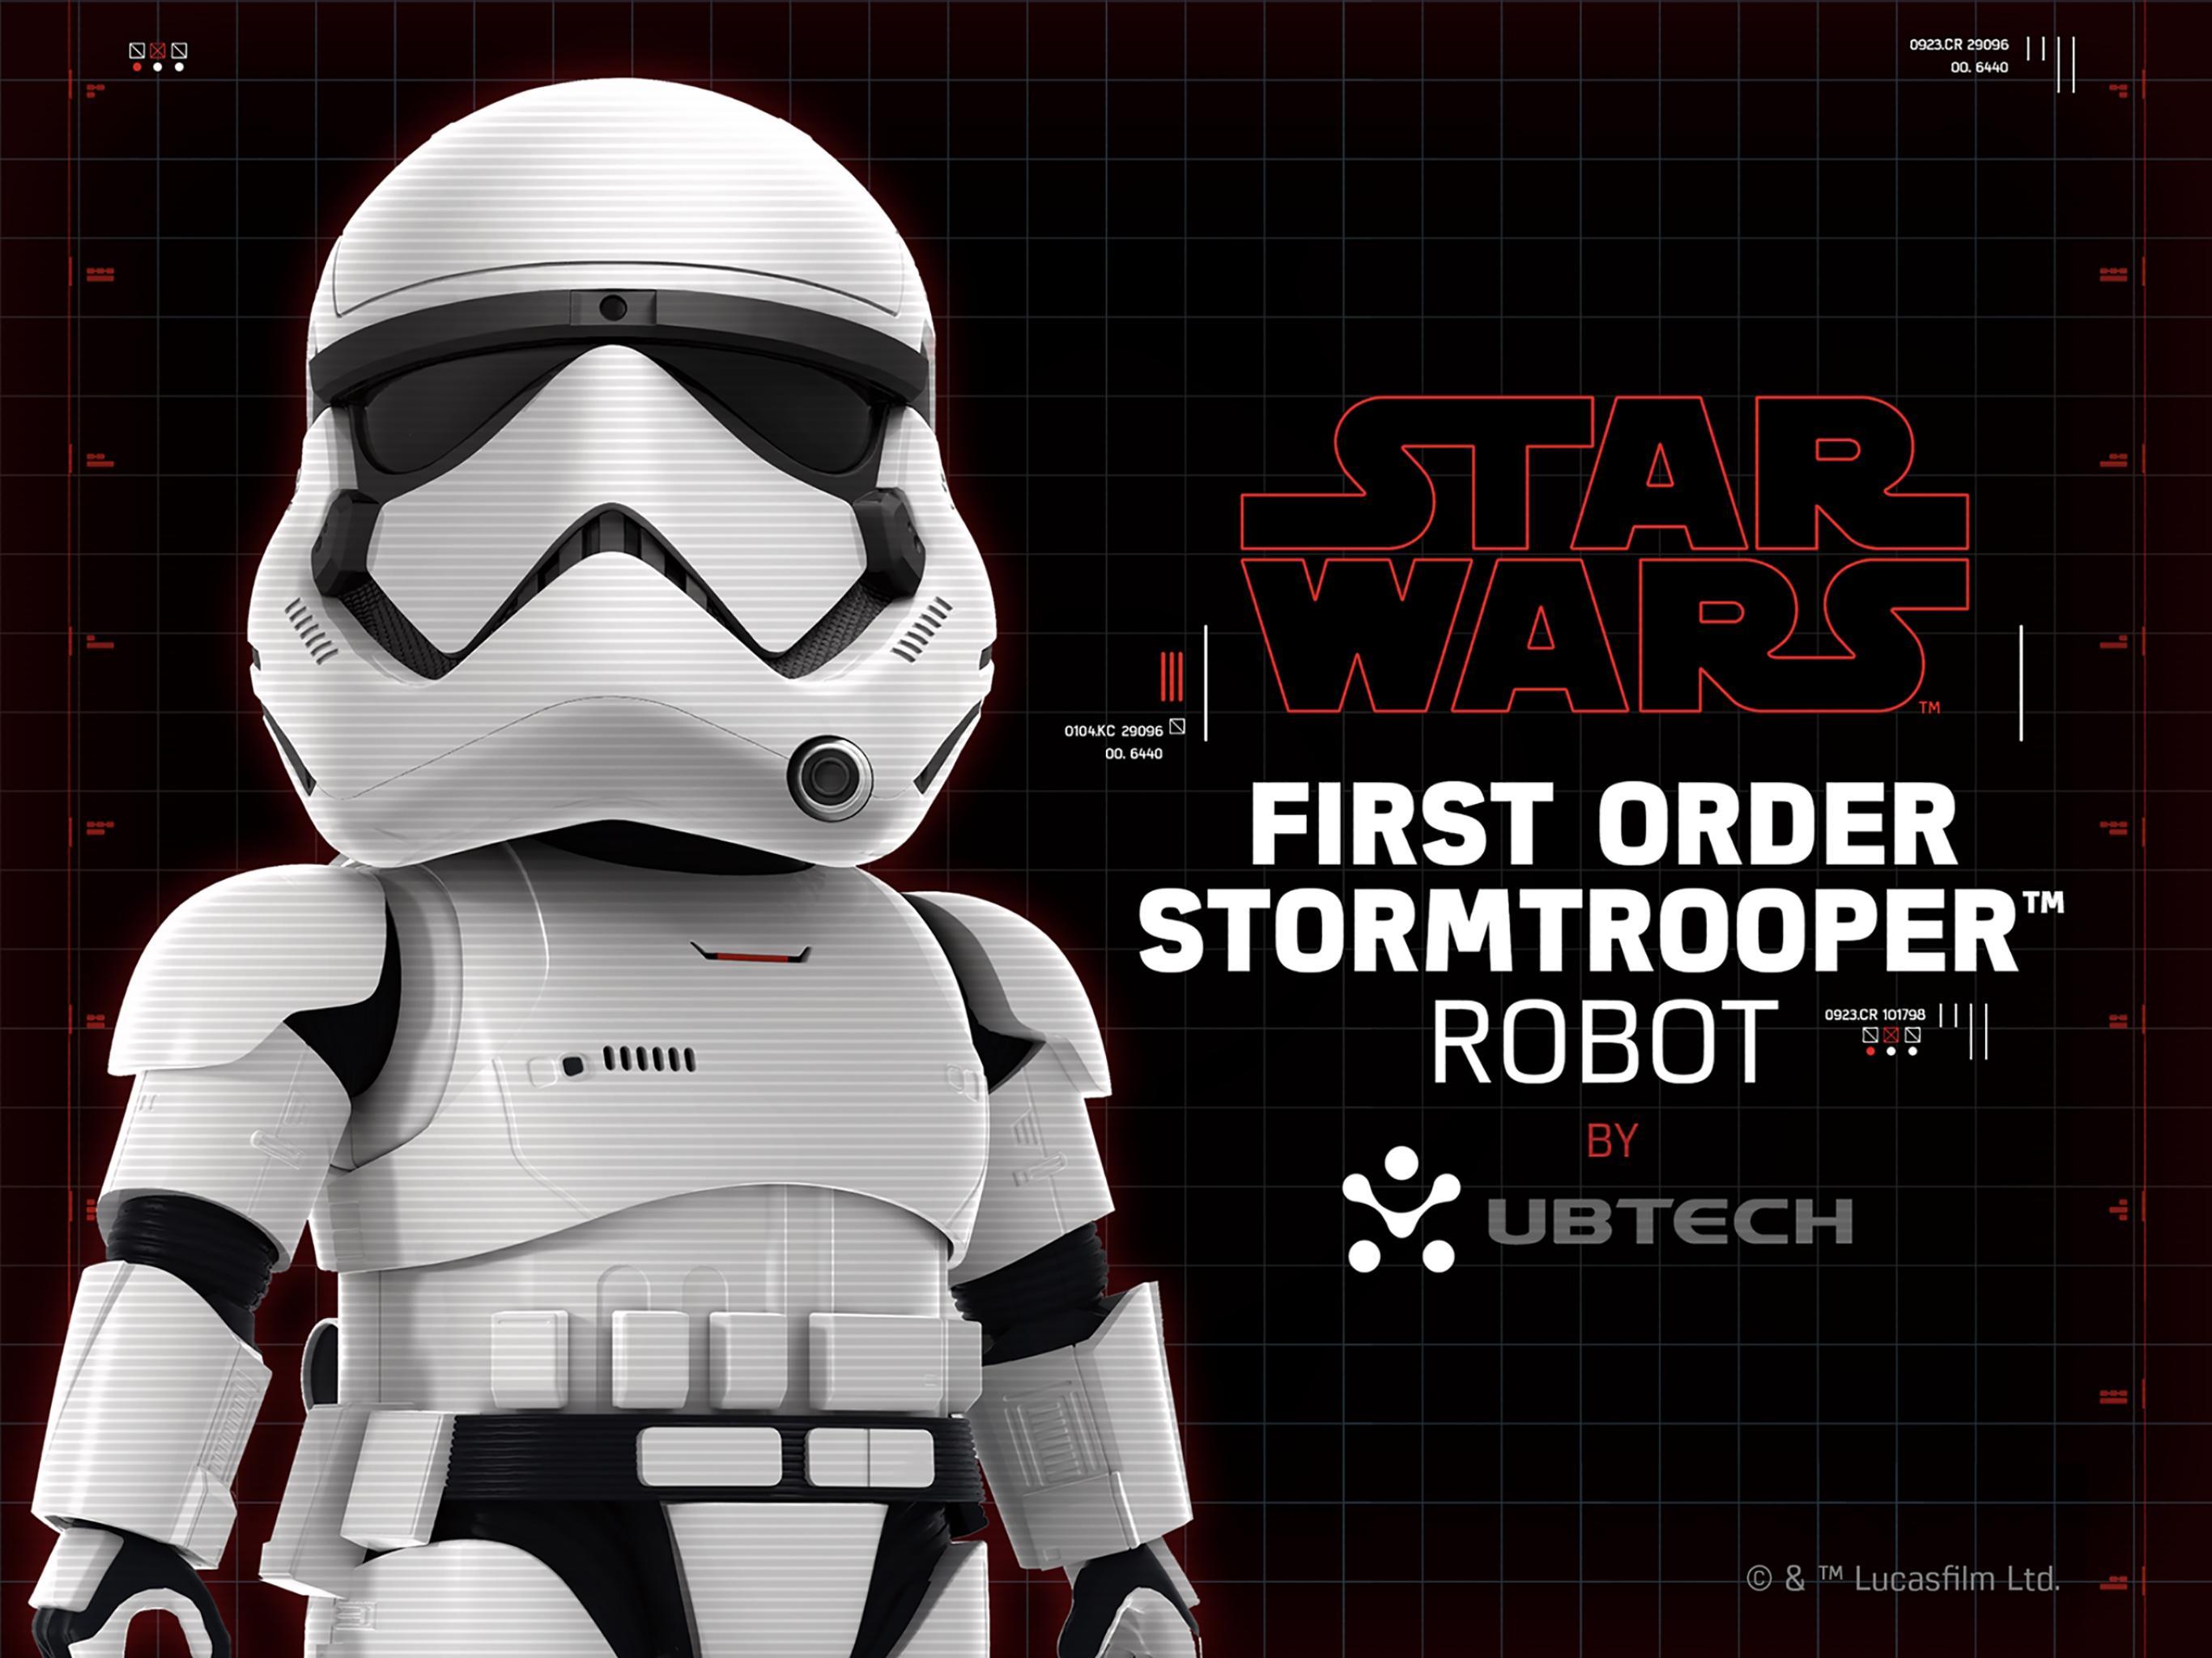 First Order Stormtrooper Robot for Android - APK Download